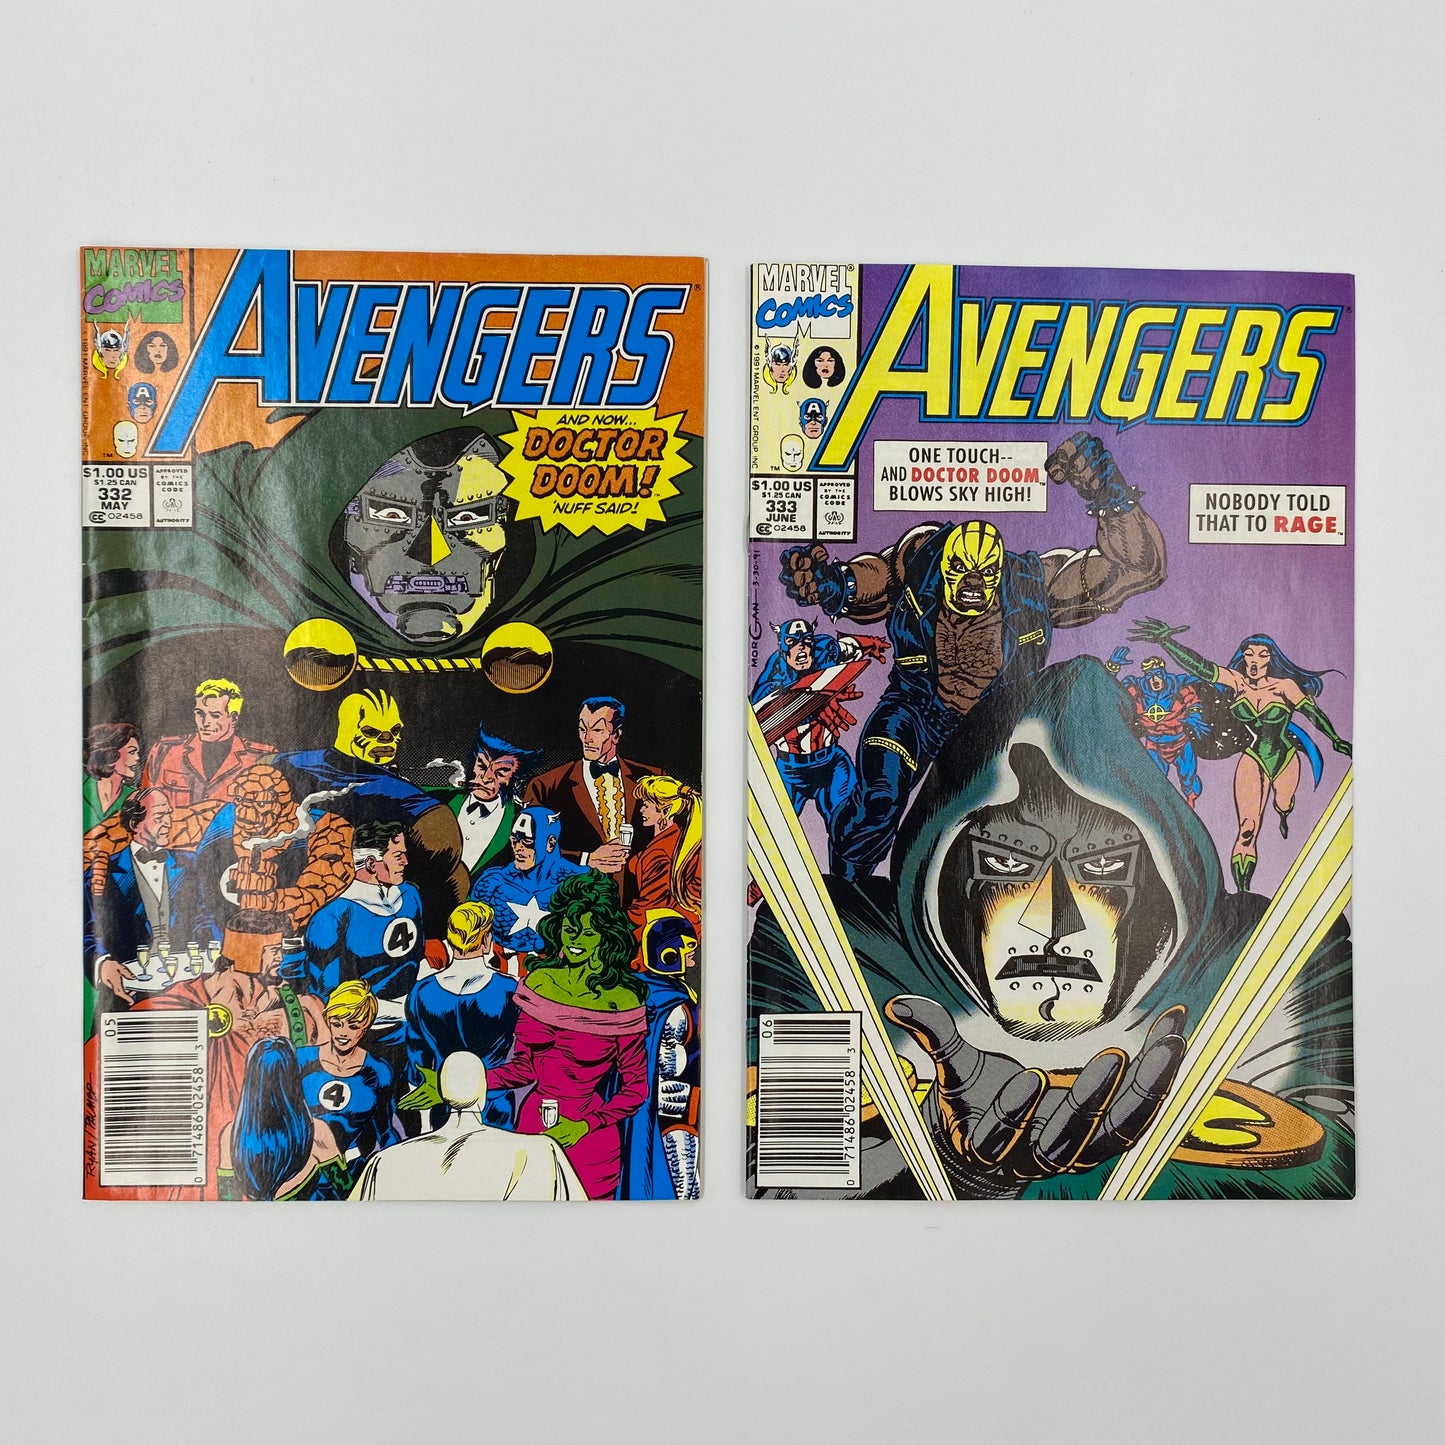 Avengers #332 & #333 "and now...DOCTOR DOOM! 'nuff said!" (1991) Marvel